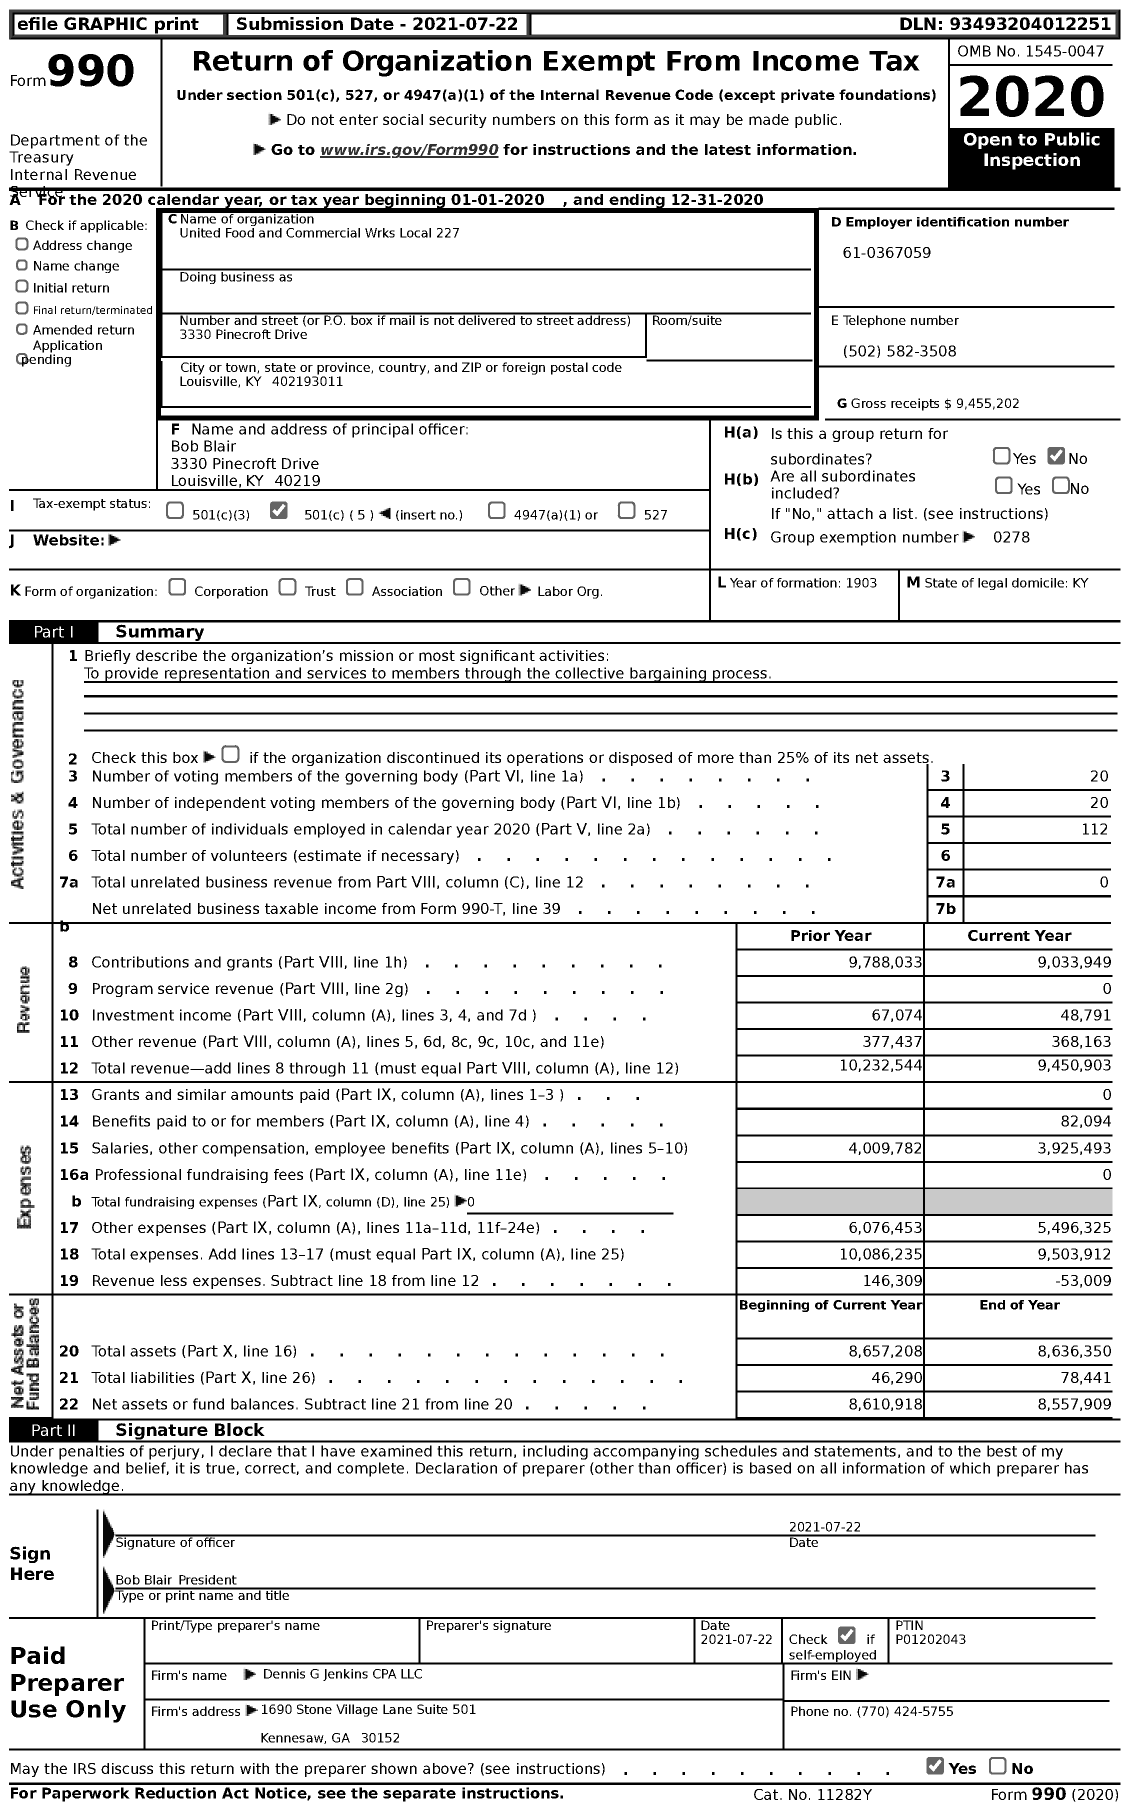 Image of first page of 2020 Form 990 for United Food & Commercial Workers Union - 227 Local